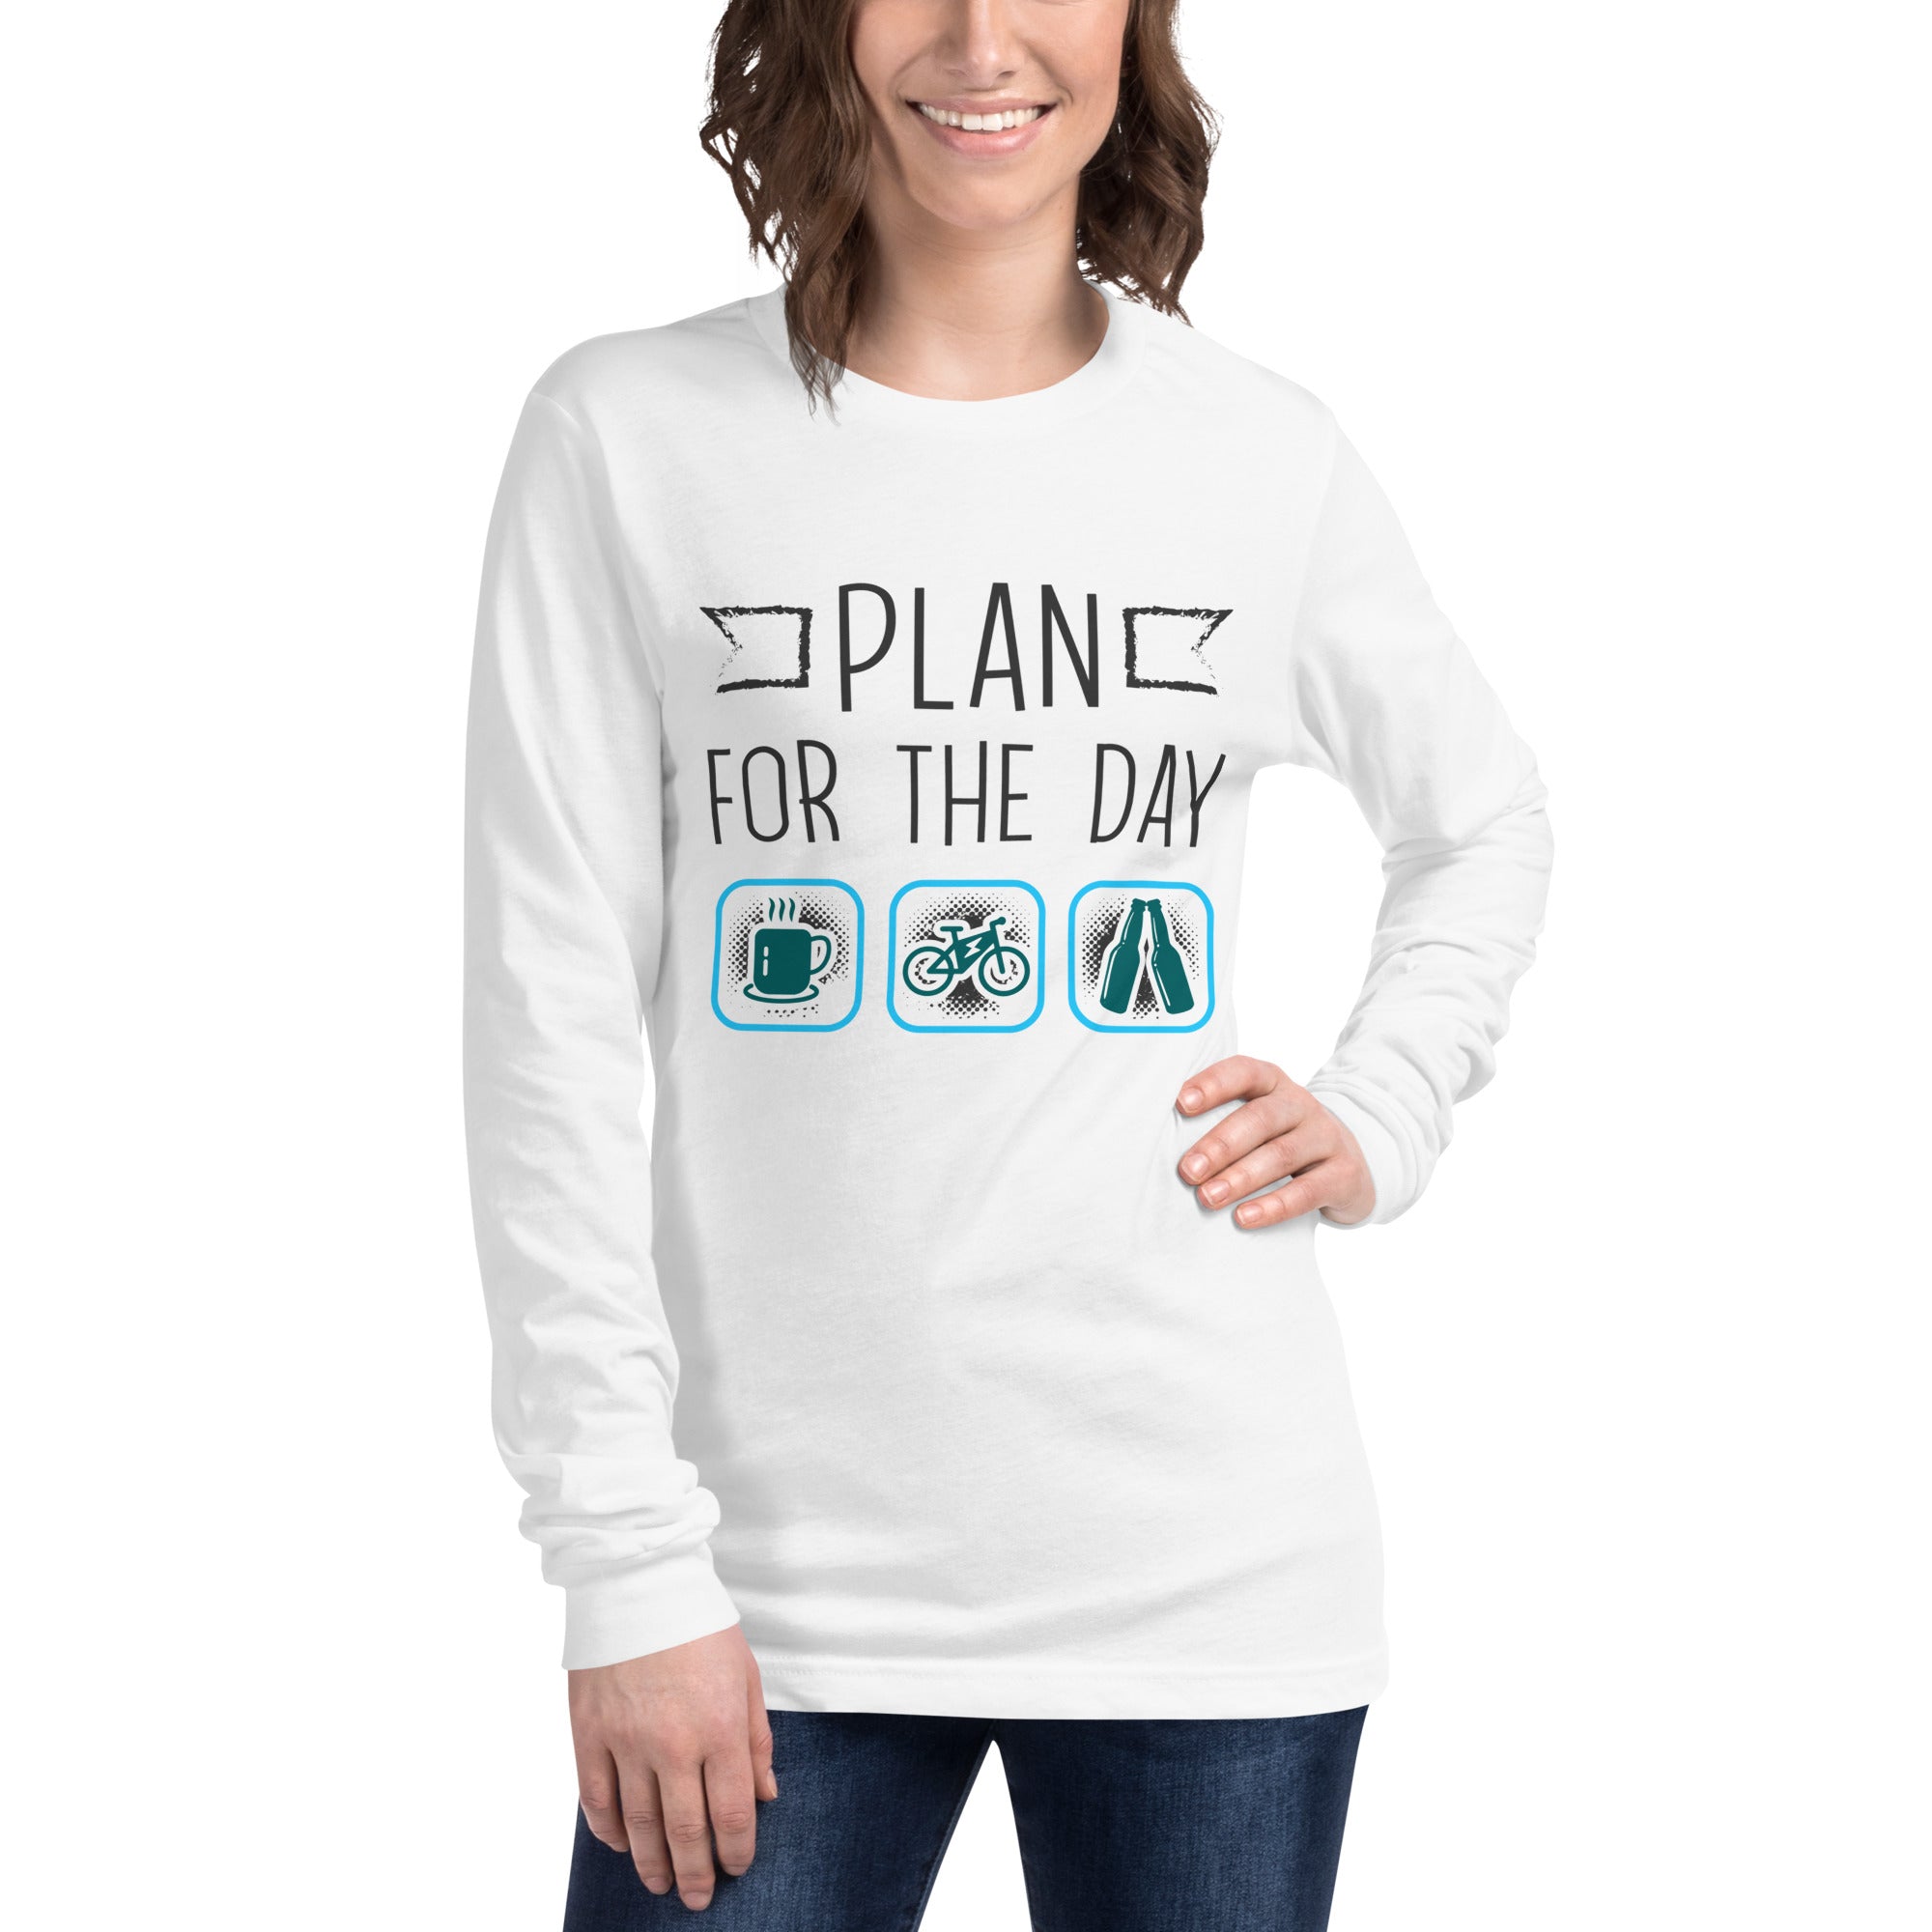 Plan for the Day "Coffee, E-bike, Beer" Bella + Canvas 3501 Women's Long Sleeve Tee White